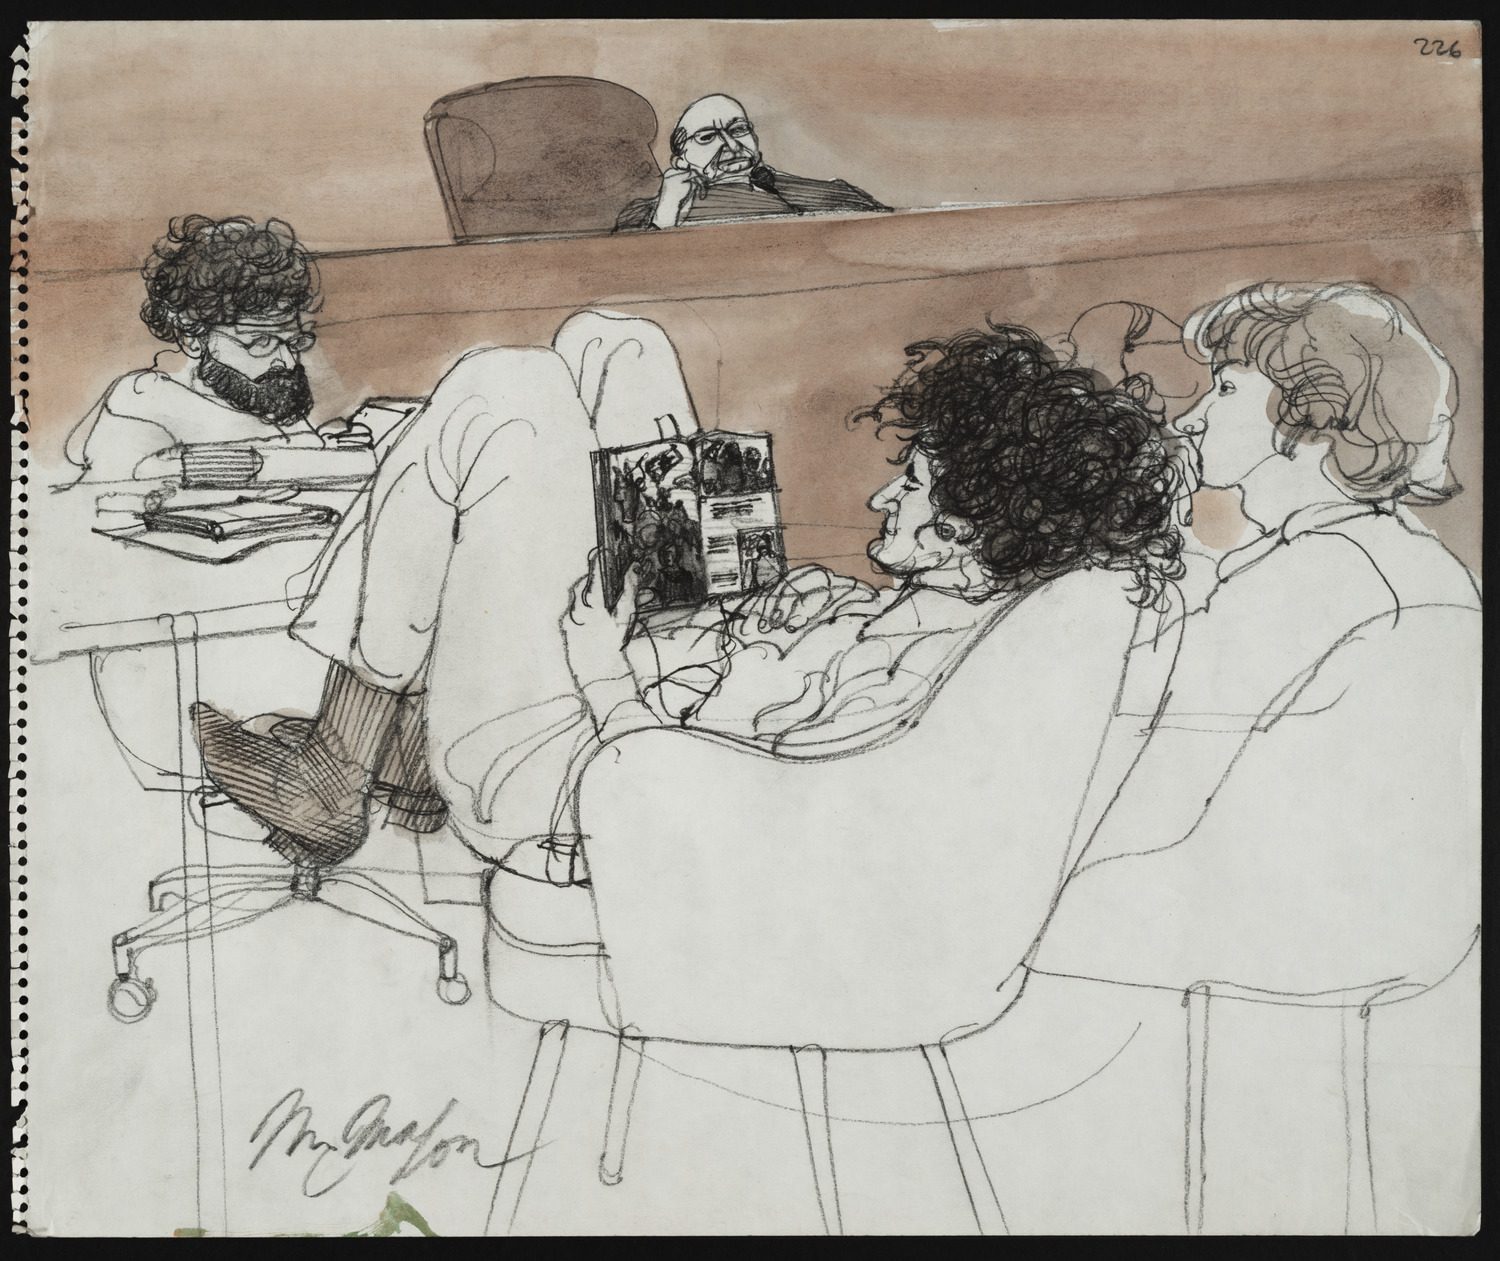 Courtroom illustration of Abbie Hoffman reading a magazine at the Chicago Seven (Chicago Eight) Trial.